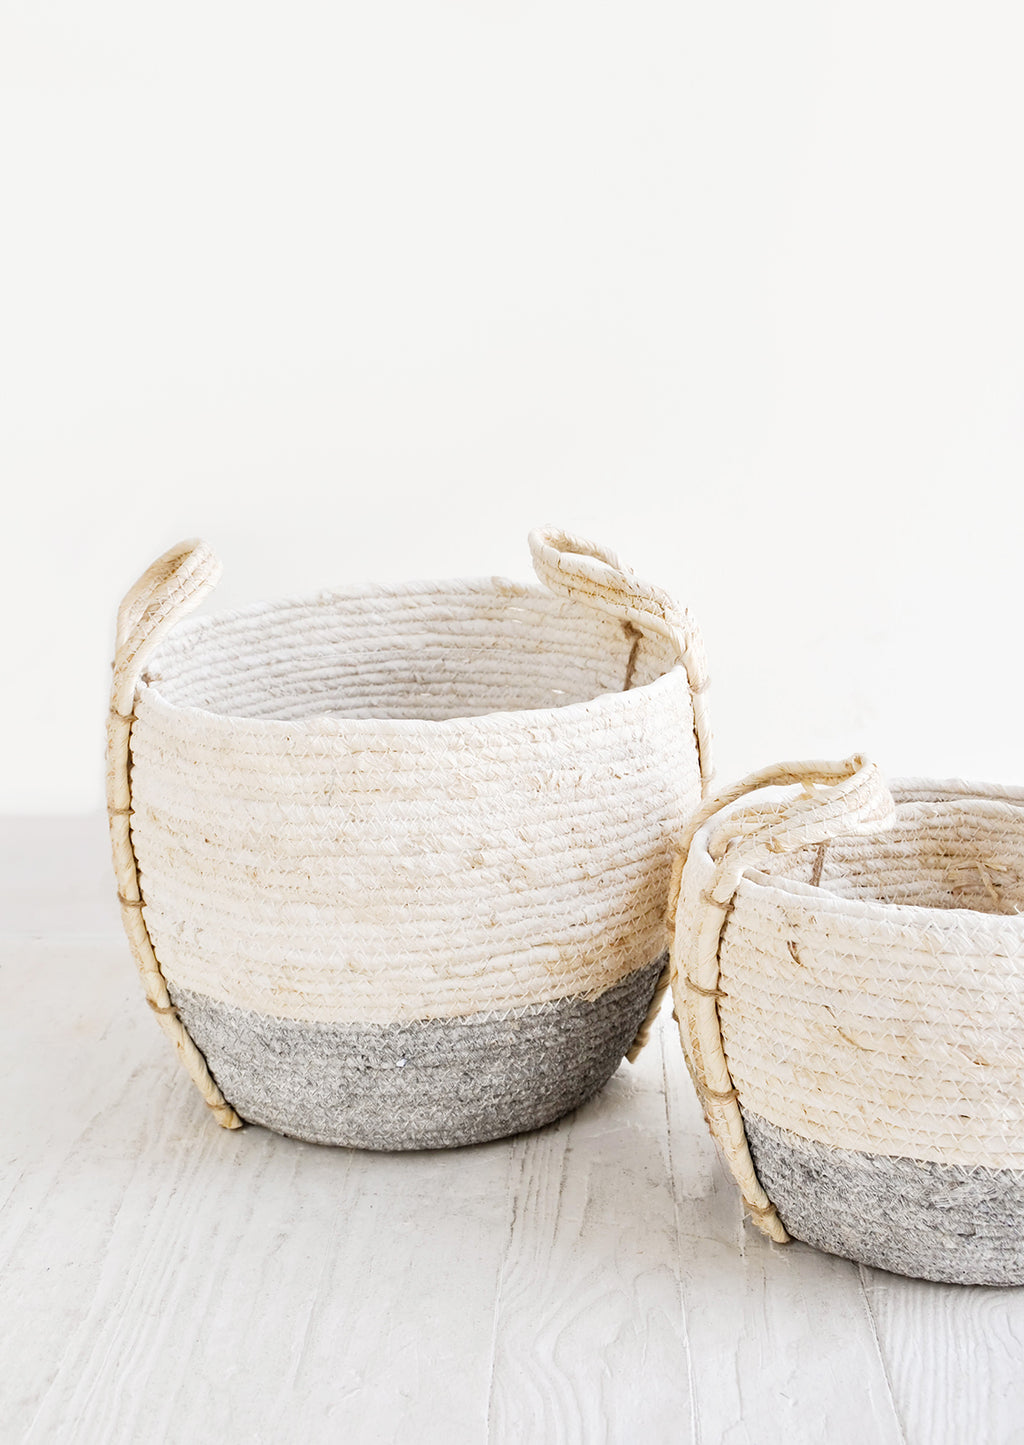 Slate / Low [Small]: Small, round storage baskets made from natural maize fiber, fiber handles attached at sides, band of contrasting grey color along bottom.